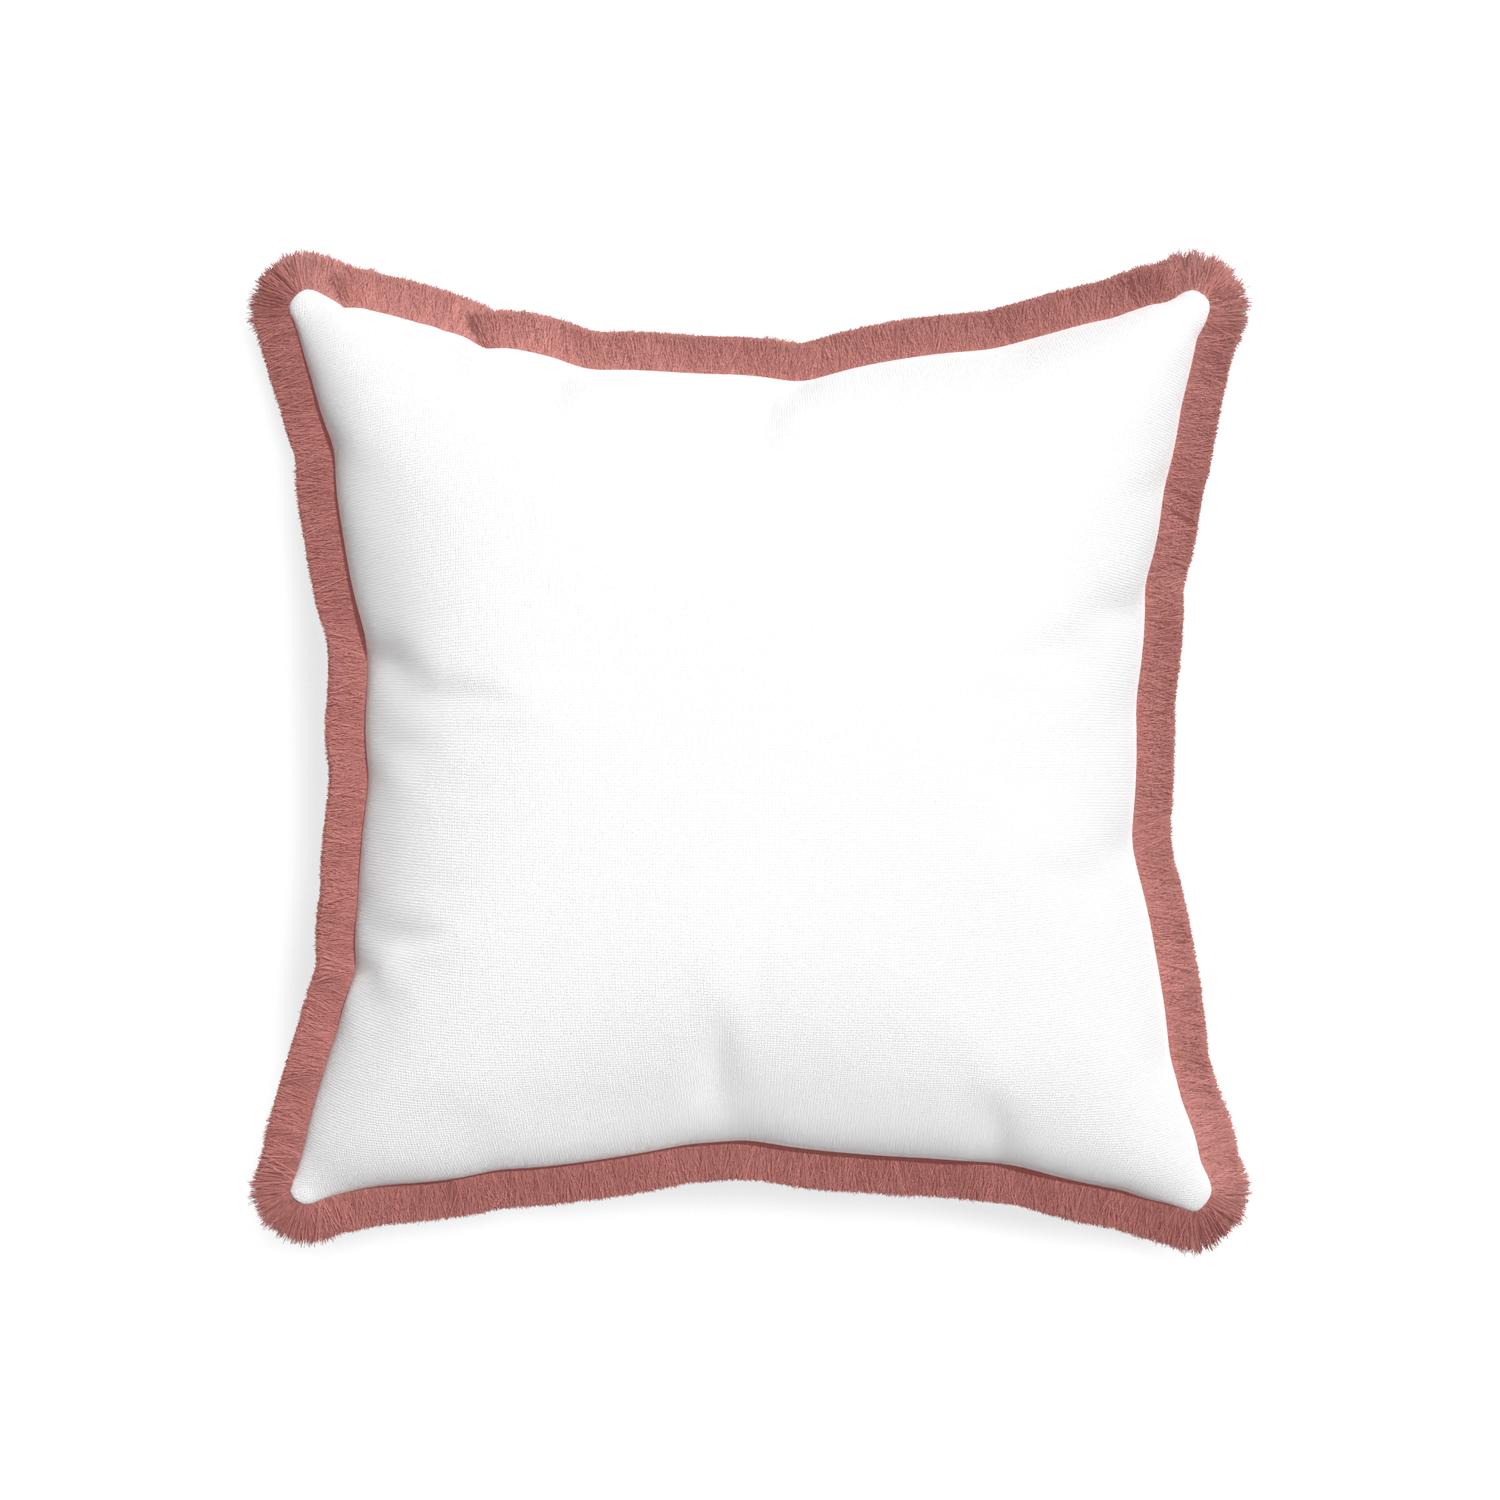 20-square snow custom pillow with d fringe on white background